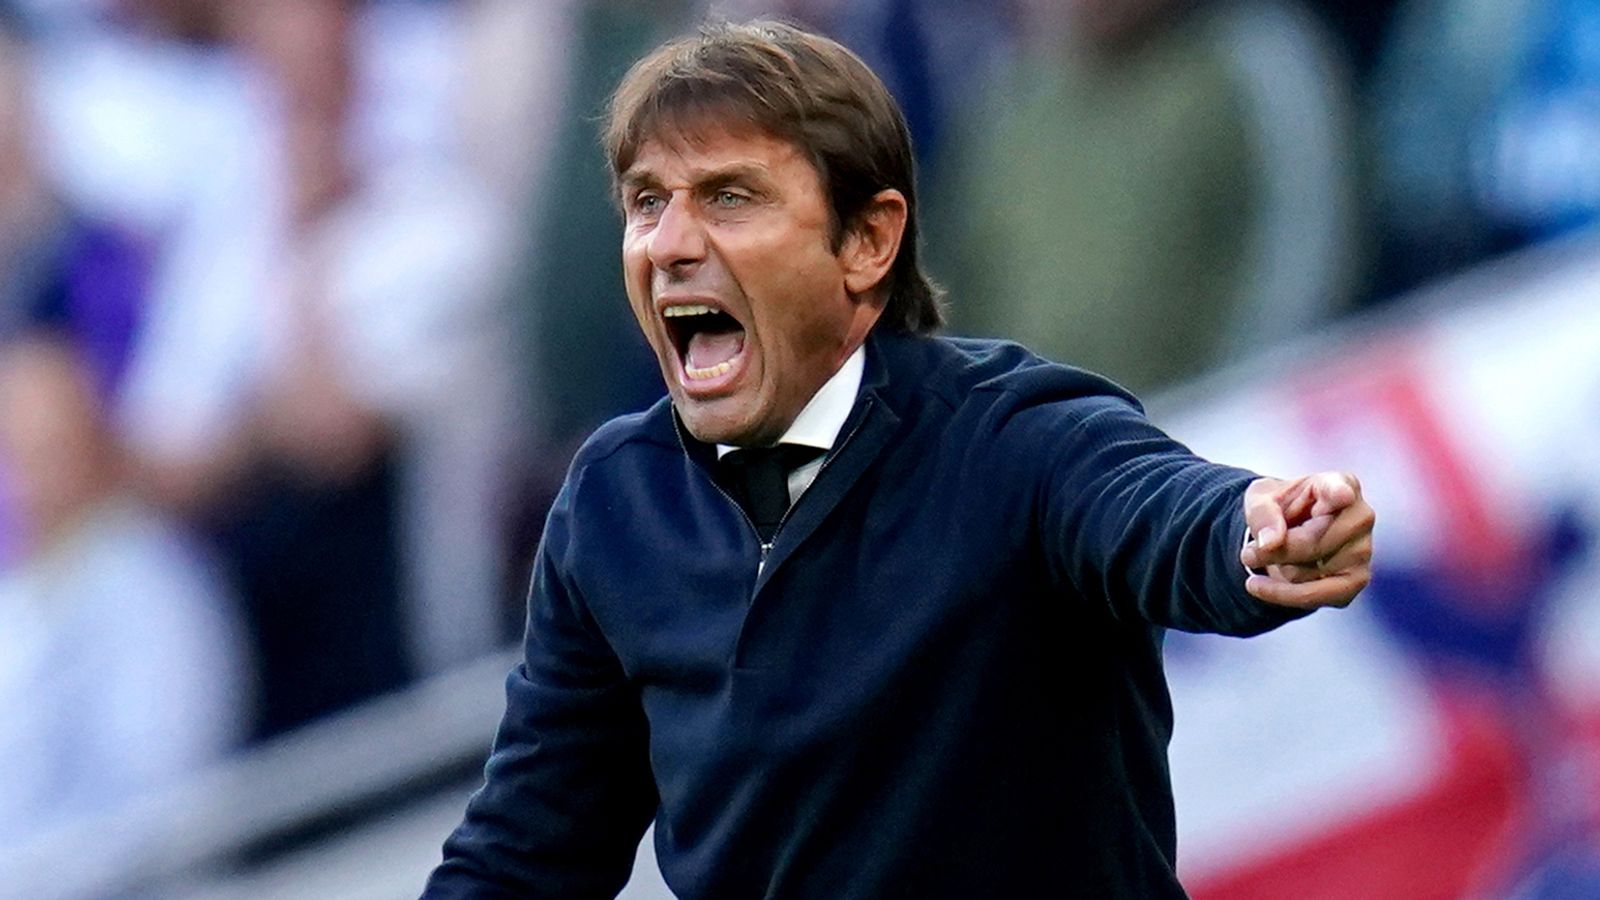 Antonio Conte: Tottenham boss says he is 'happy' at the club amid 'disrespectful' links to the Juventus job